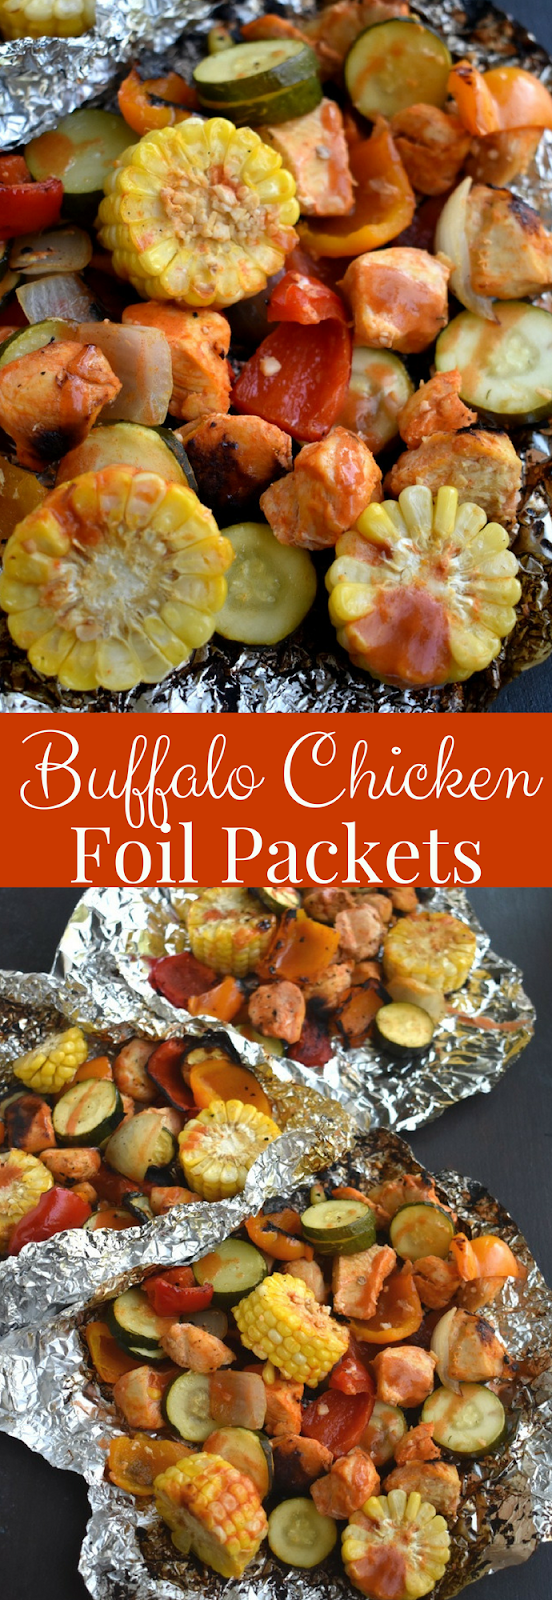 Buffalo Chicken Foil Packets is the perfect meal to make on the grill with spicy buffalo chicken, corn on the cob, bell peppers, onions and zucchini. www.nutritionistreviews.com